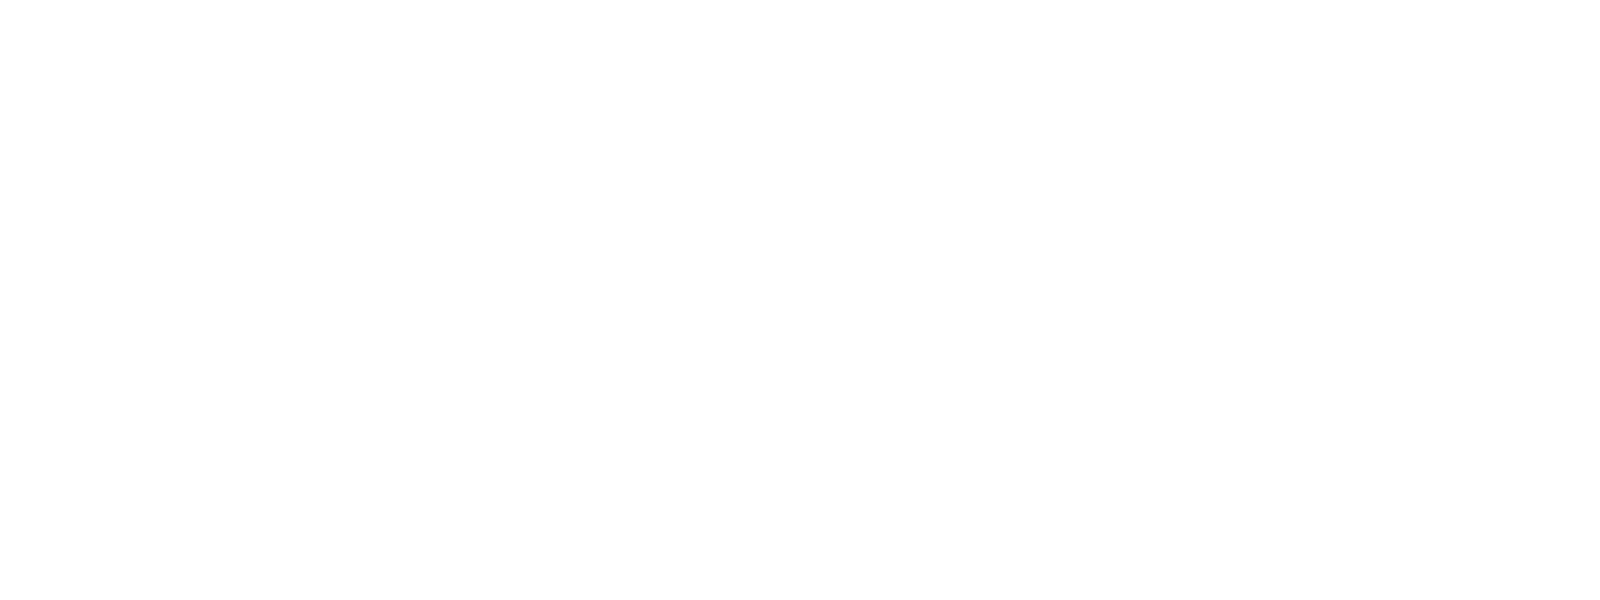 Manage for Fertility | Feed for Fertility | Breed for Fertility